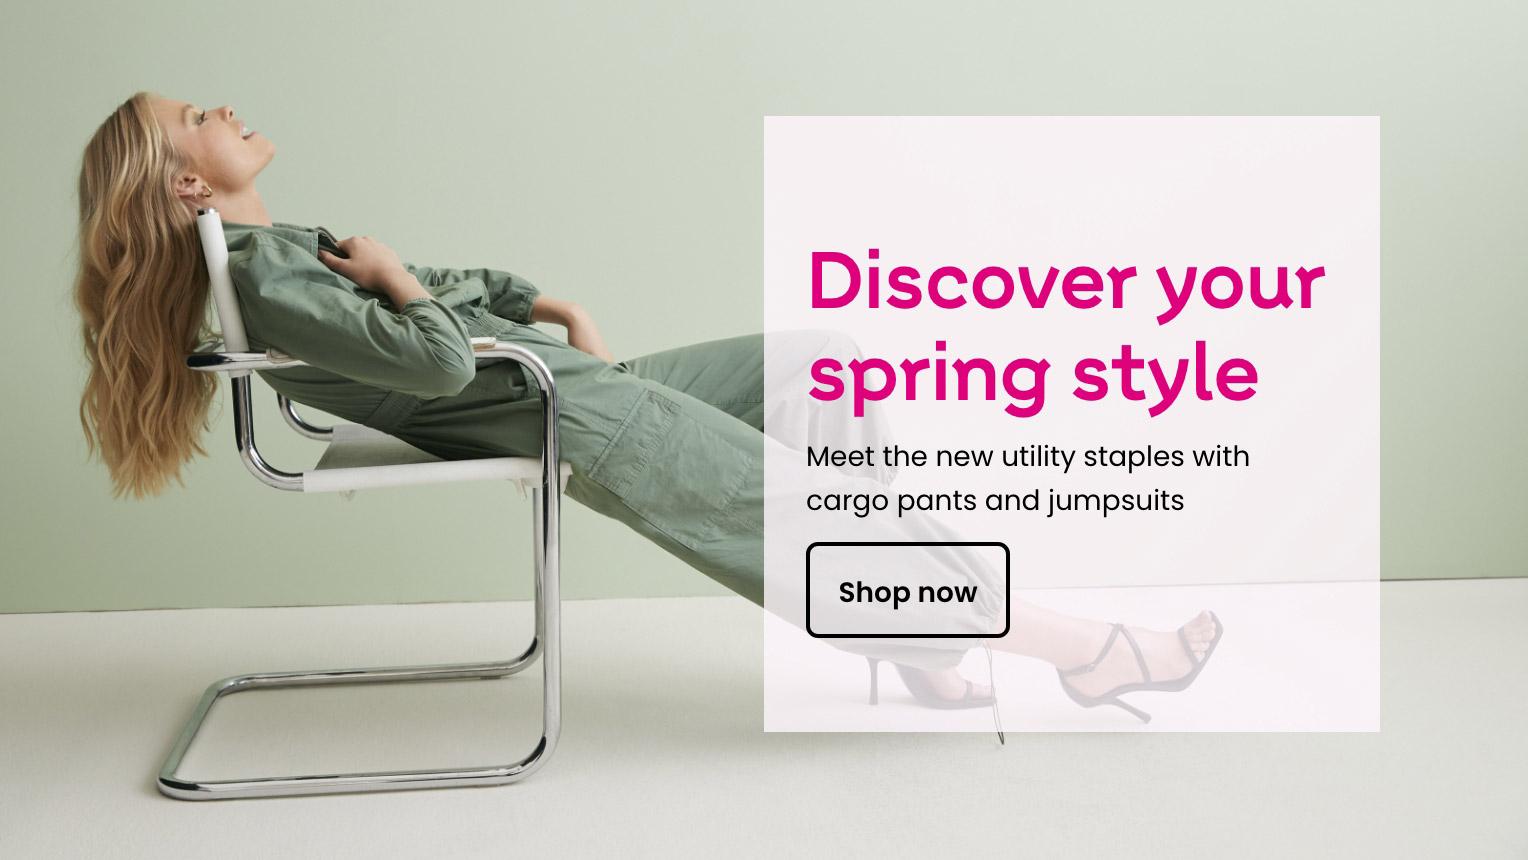 Discover your
spring style
Looks to know for
the season ahead
Shop now